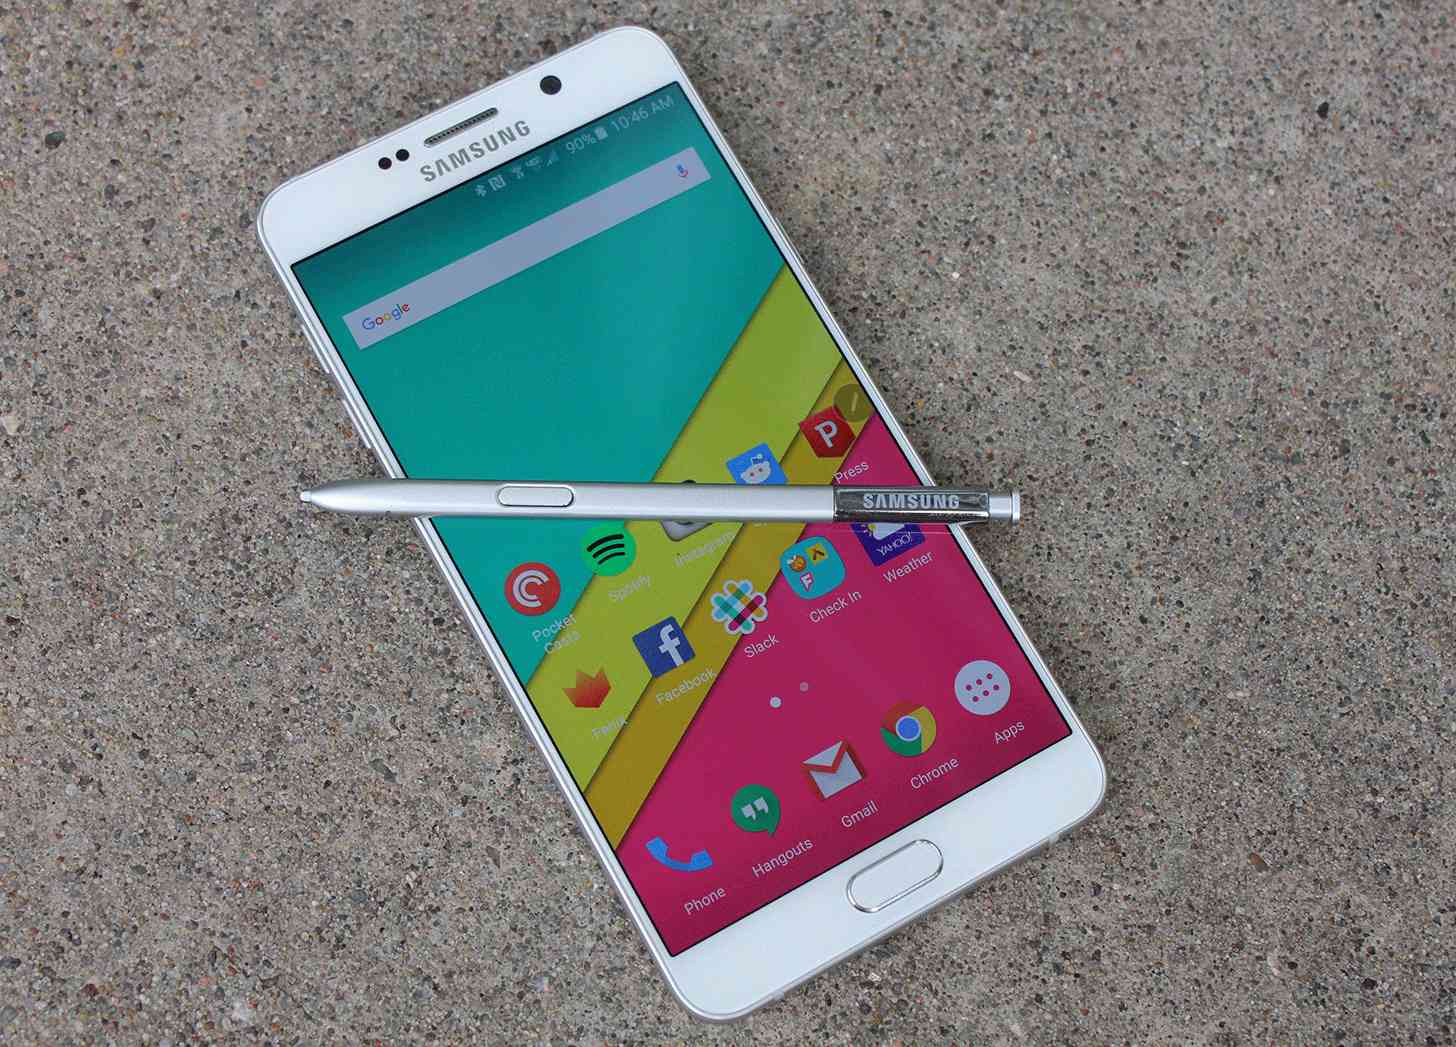 Samsung Galaxy Note 5 front S Pen